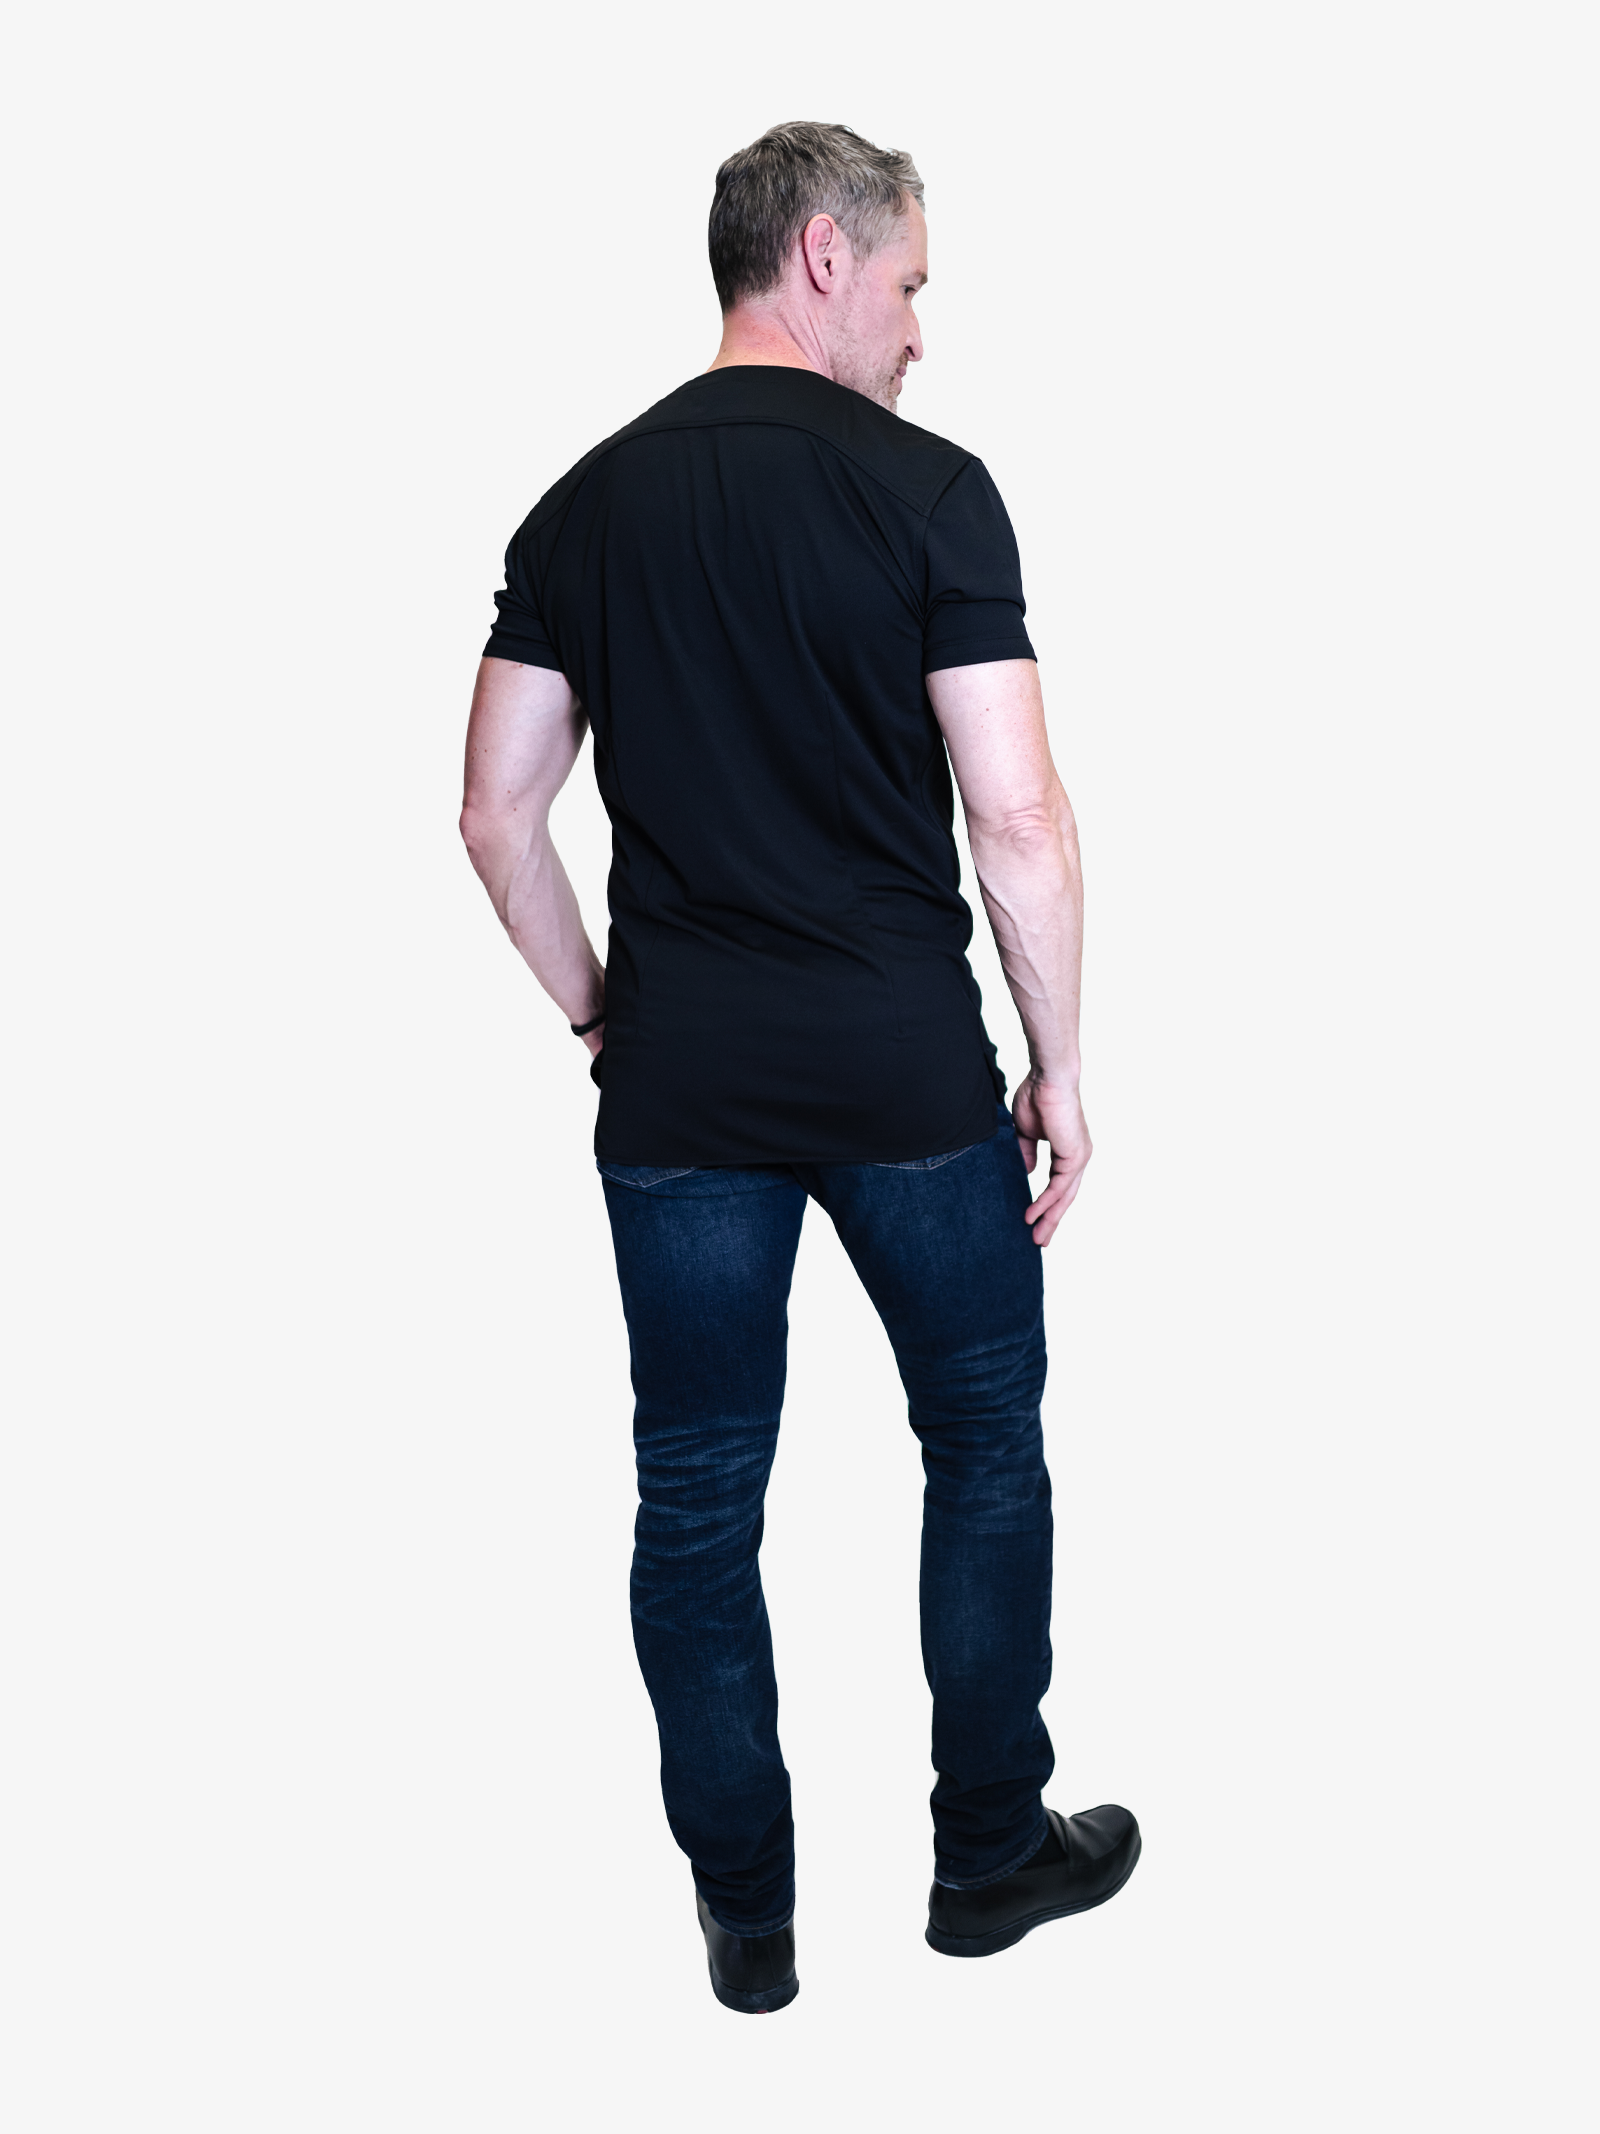 man wearing a black collarless short sleeve shirt custom fitted to his body